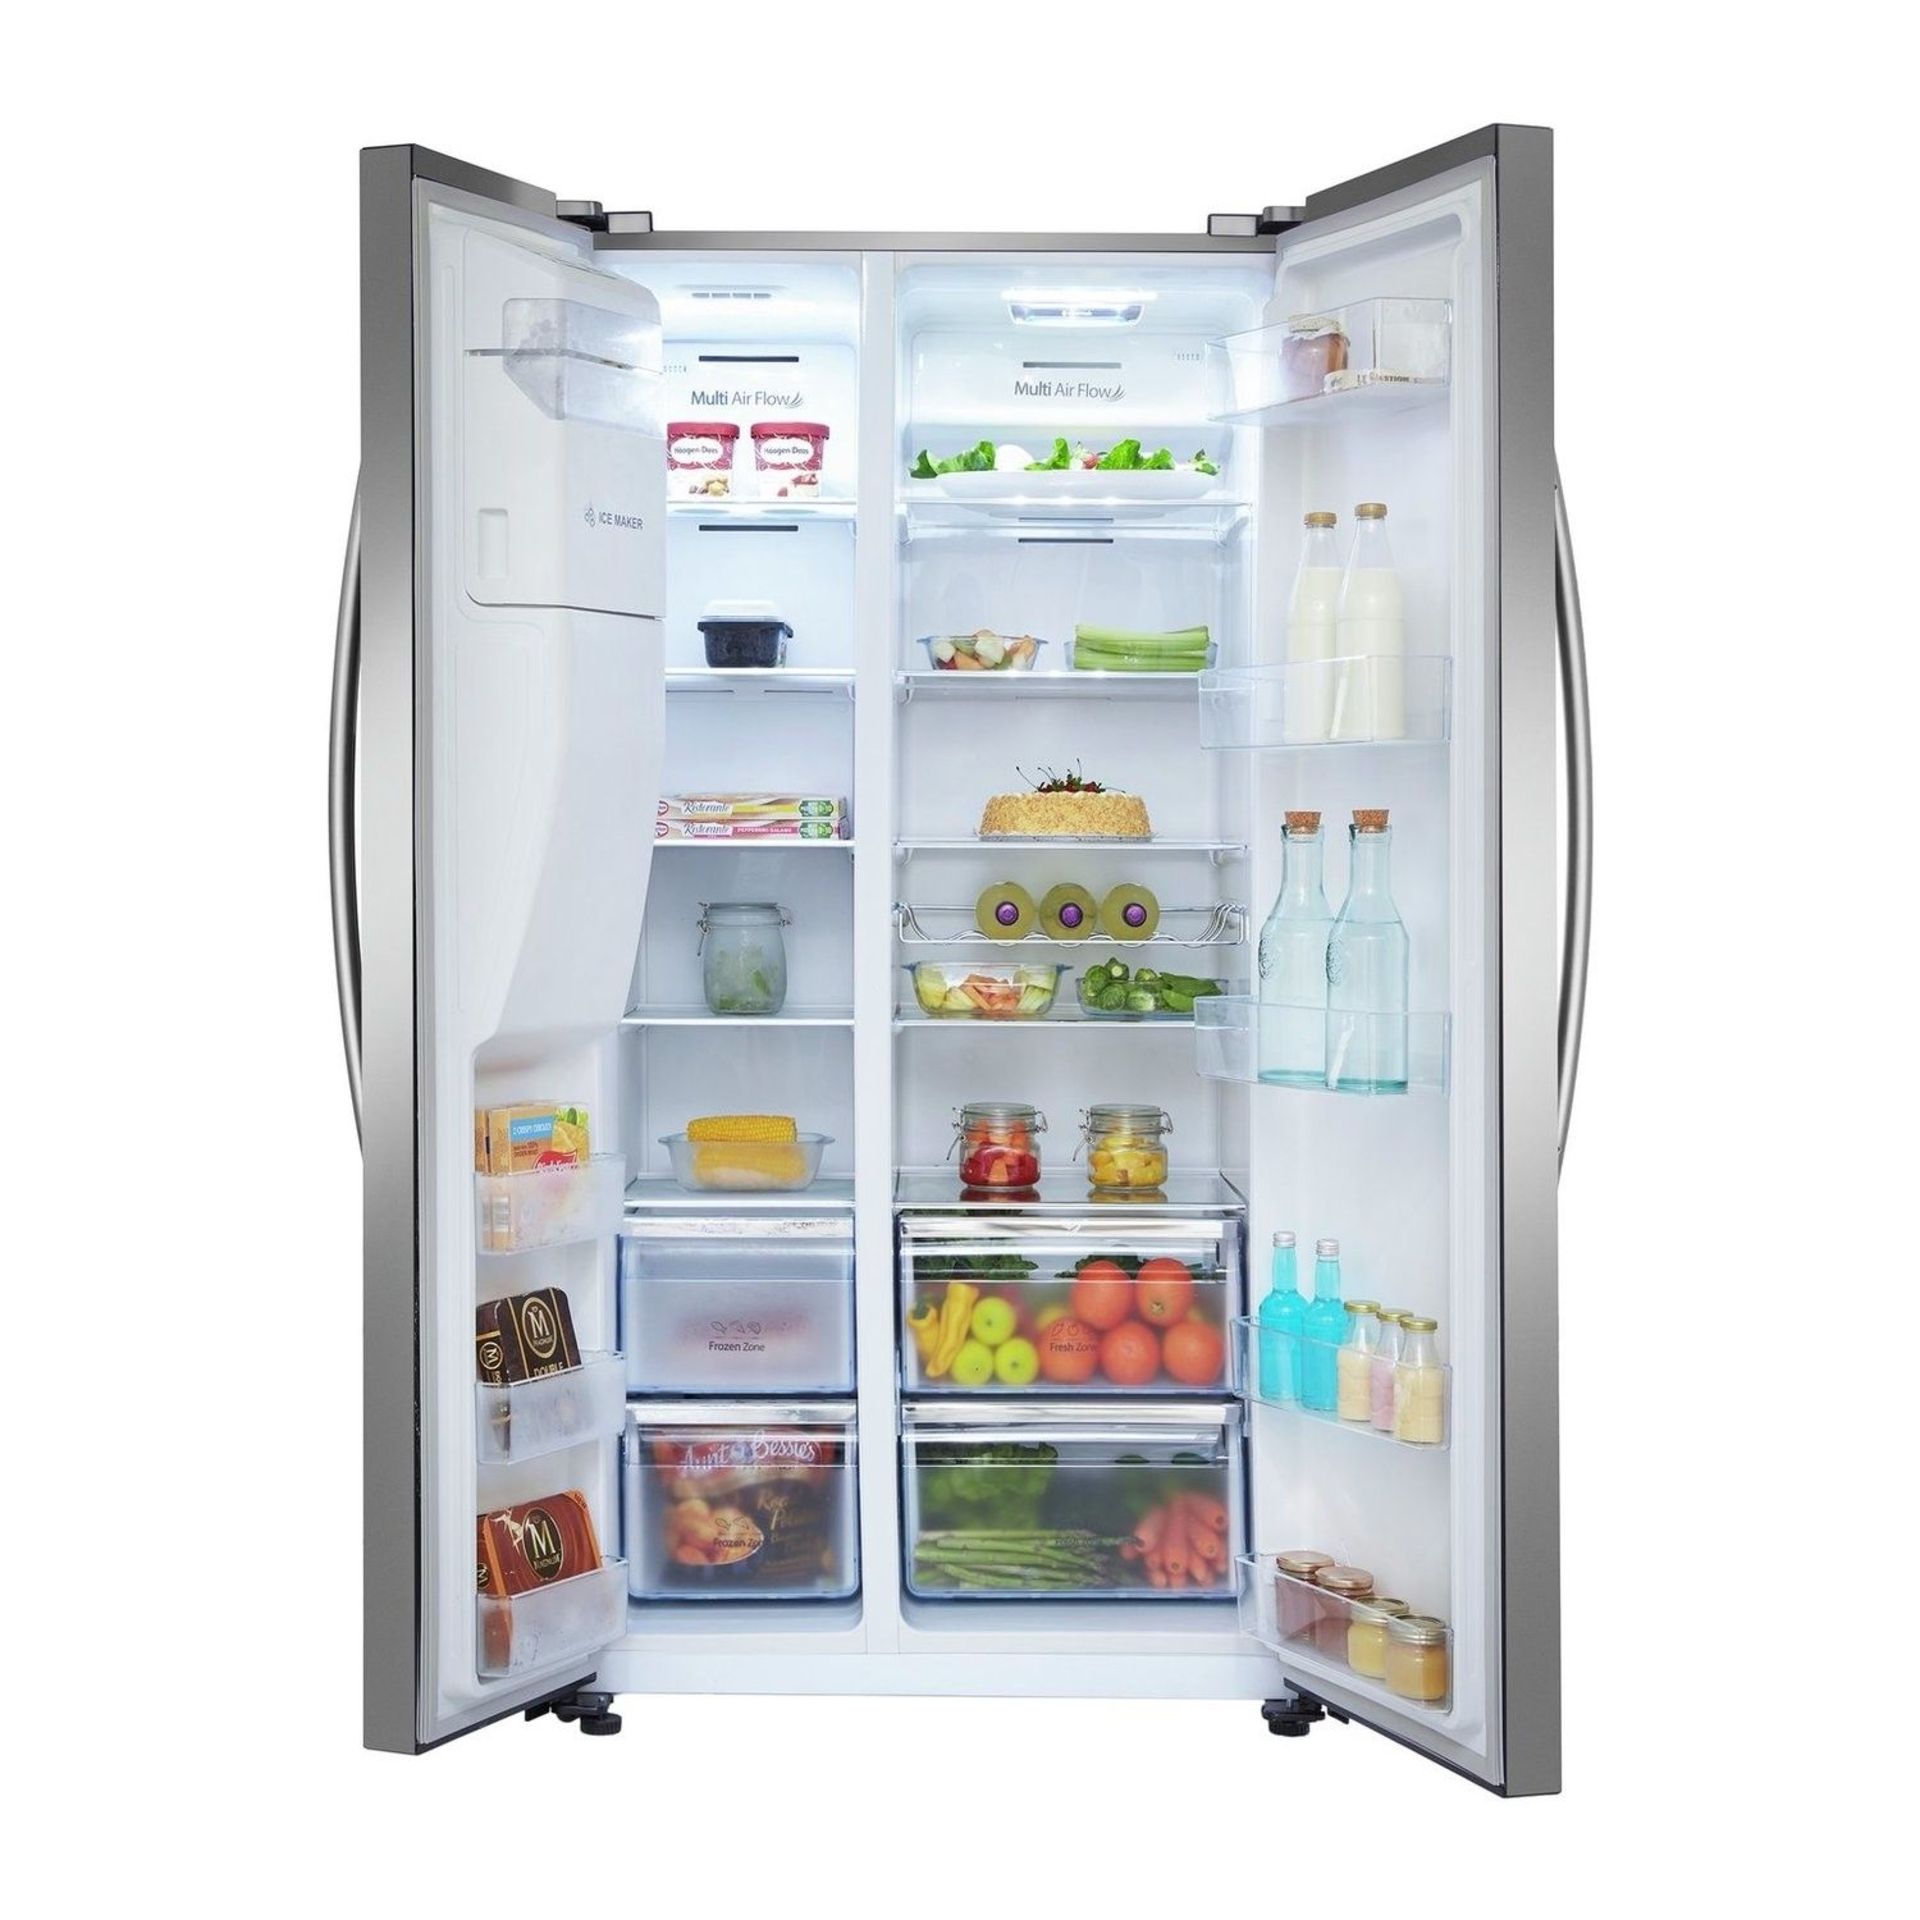 Hisense RS696N4IC1 Side-by-side American Fridge Freezer. - RRP £939.00. Featuring the iconic side- - Image 3 of 3